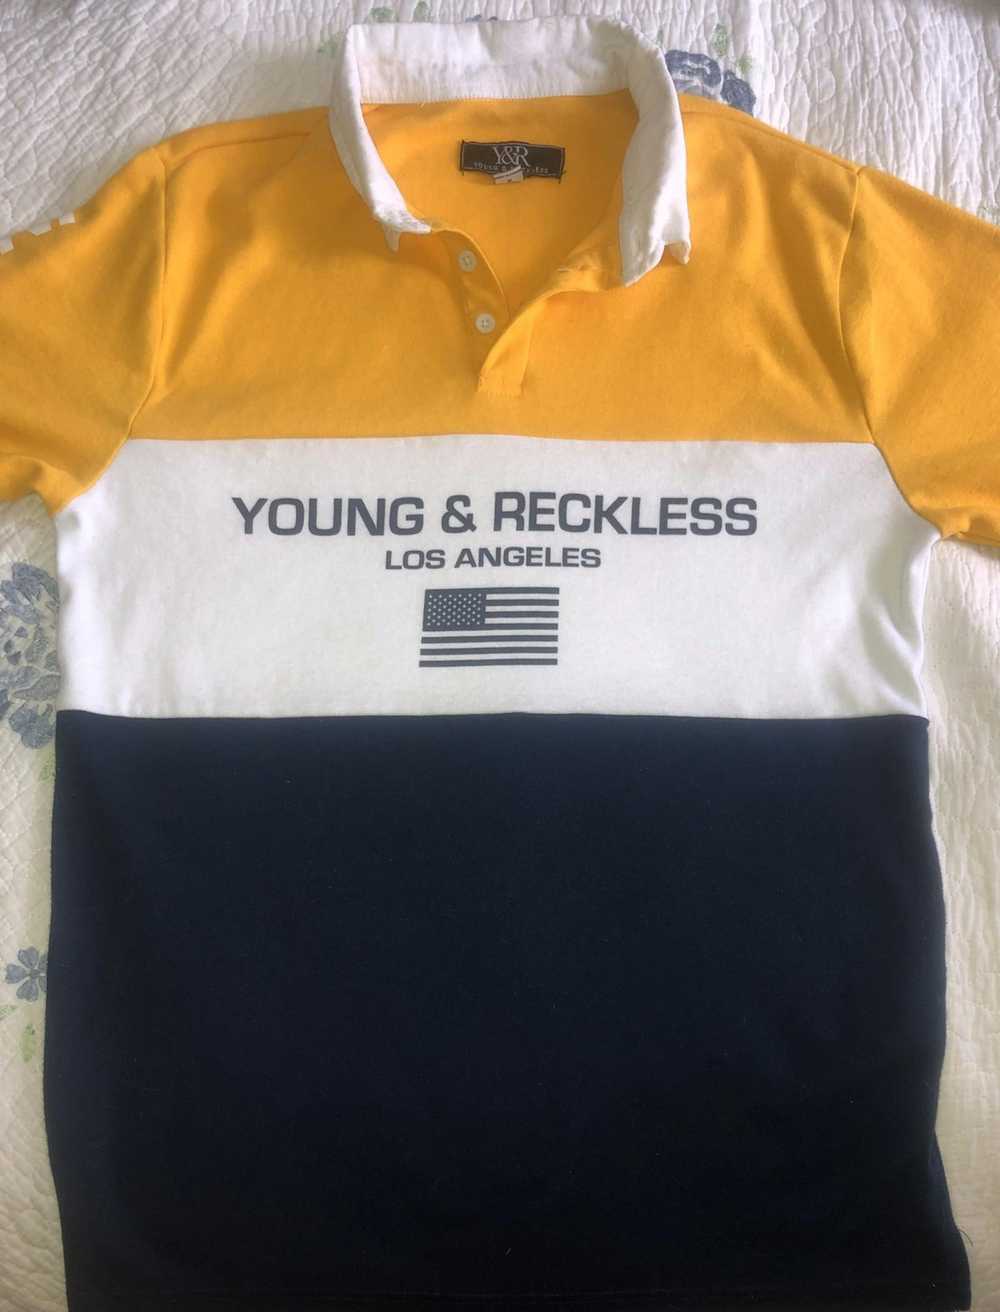 Young And Reckless Young&Reckless Tee - image 1